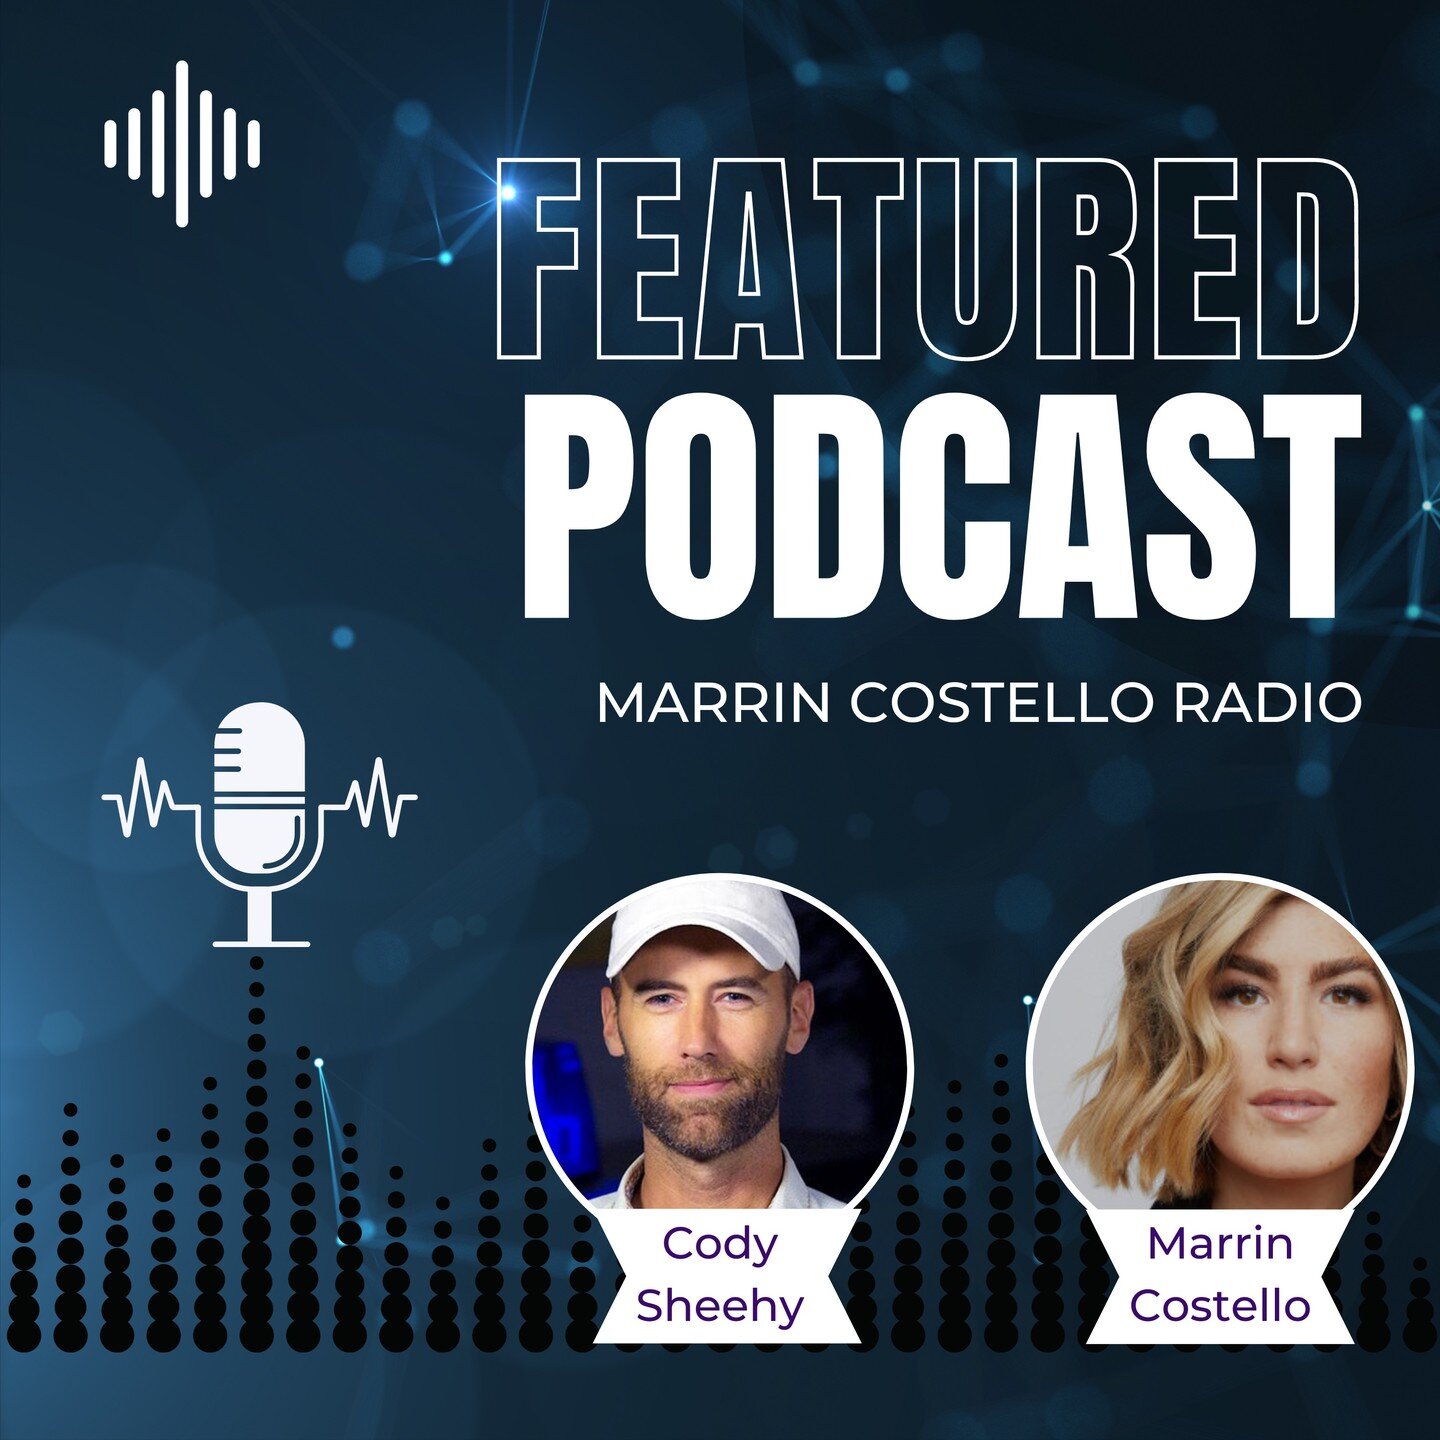 On this episode of @marrincostelloradio, @marrincostello takes us on a journey into Cody Sheehy's world, uncovering the blend of artistry and scientific prowess behind his films, including Make People Better. This episode also offers an intimate glim